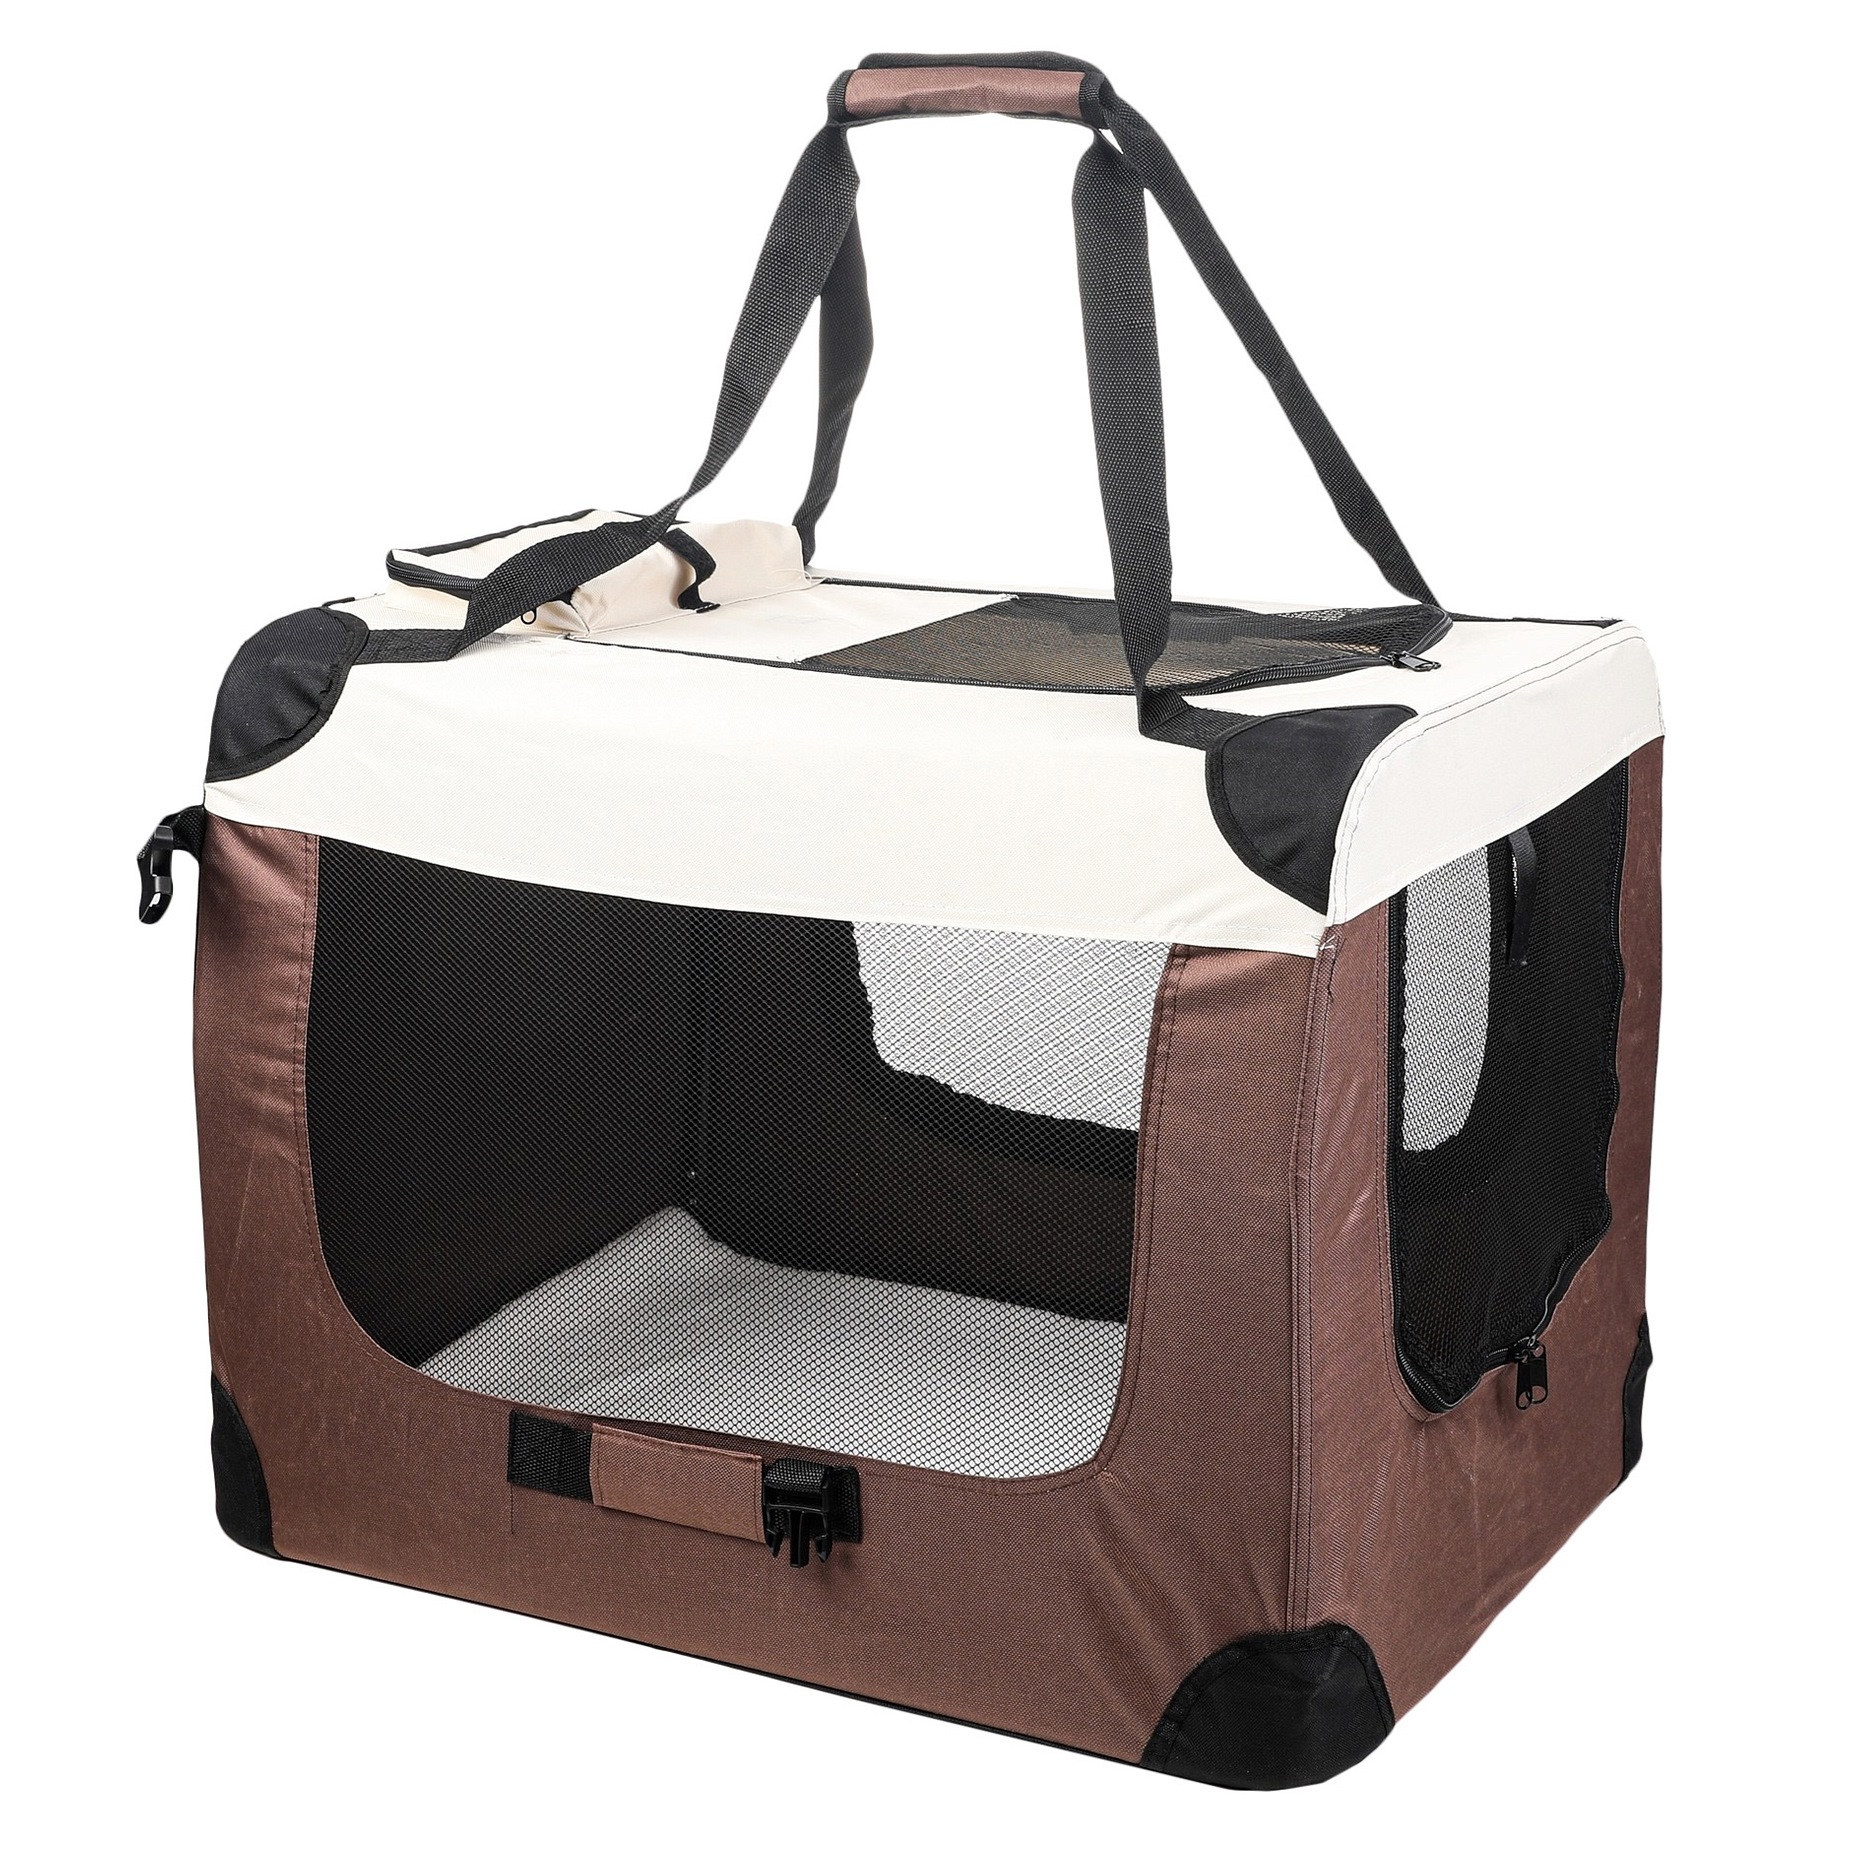 Dog car bag 100119A0003 at a discount — buy now!